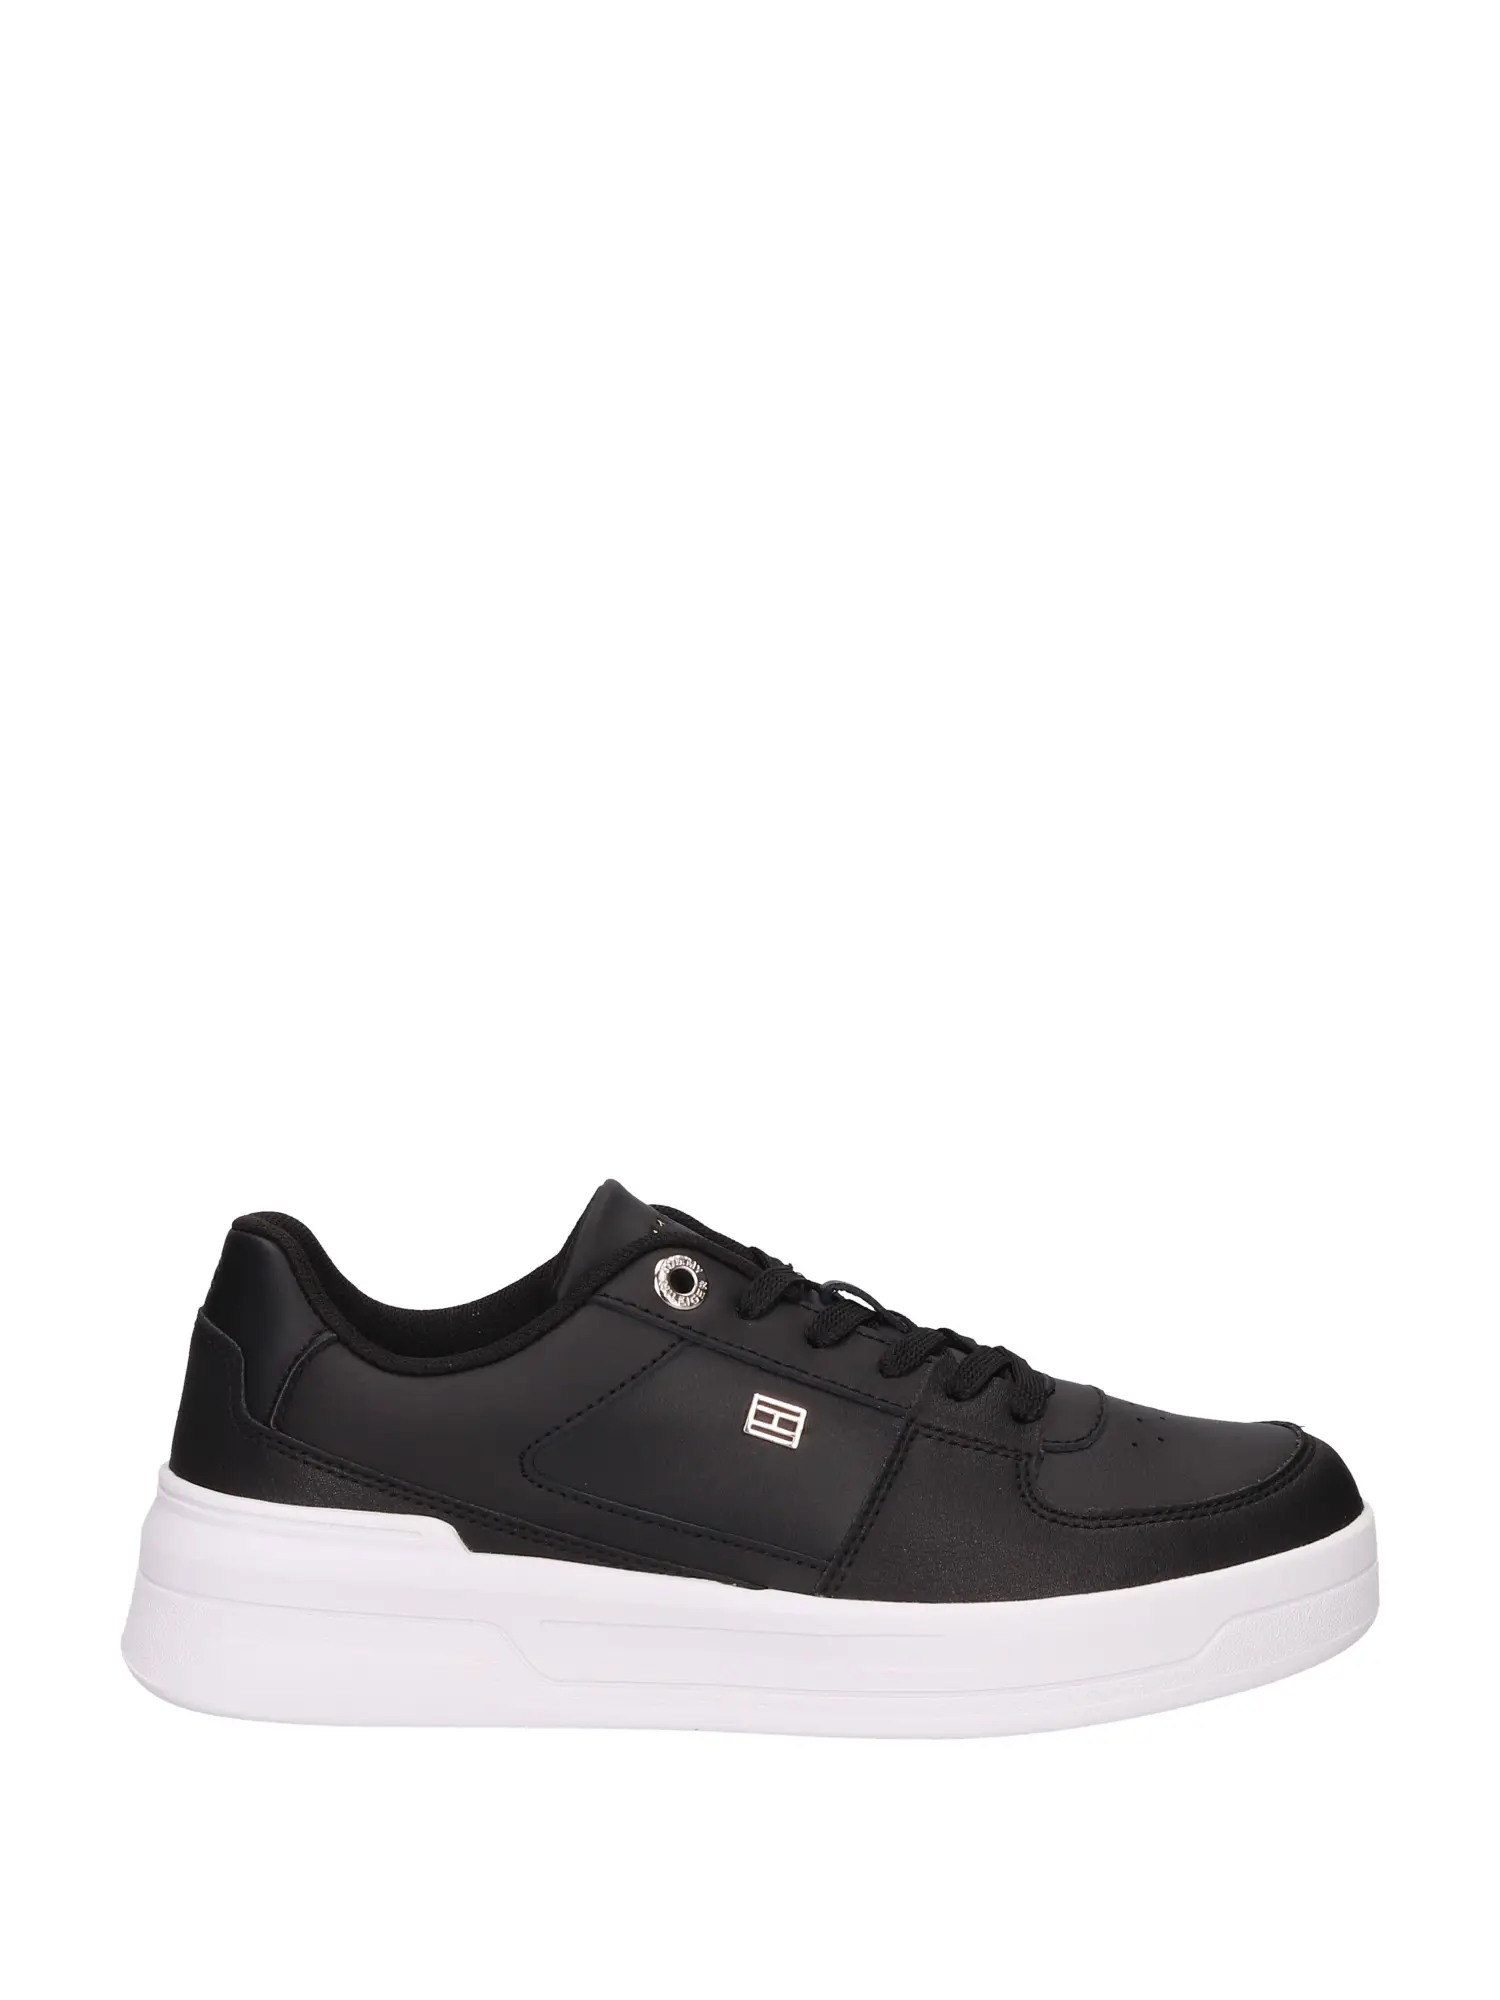 SNEAKERS DONNA - TOMMY HILFIGER - FW0FW07684 - NERO, 37